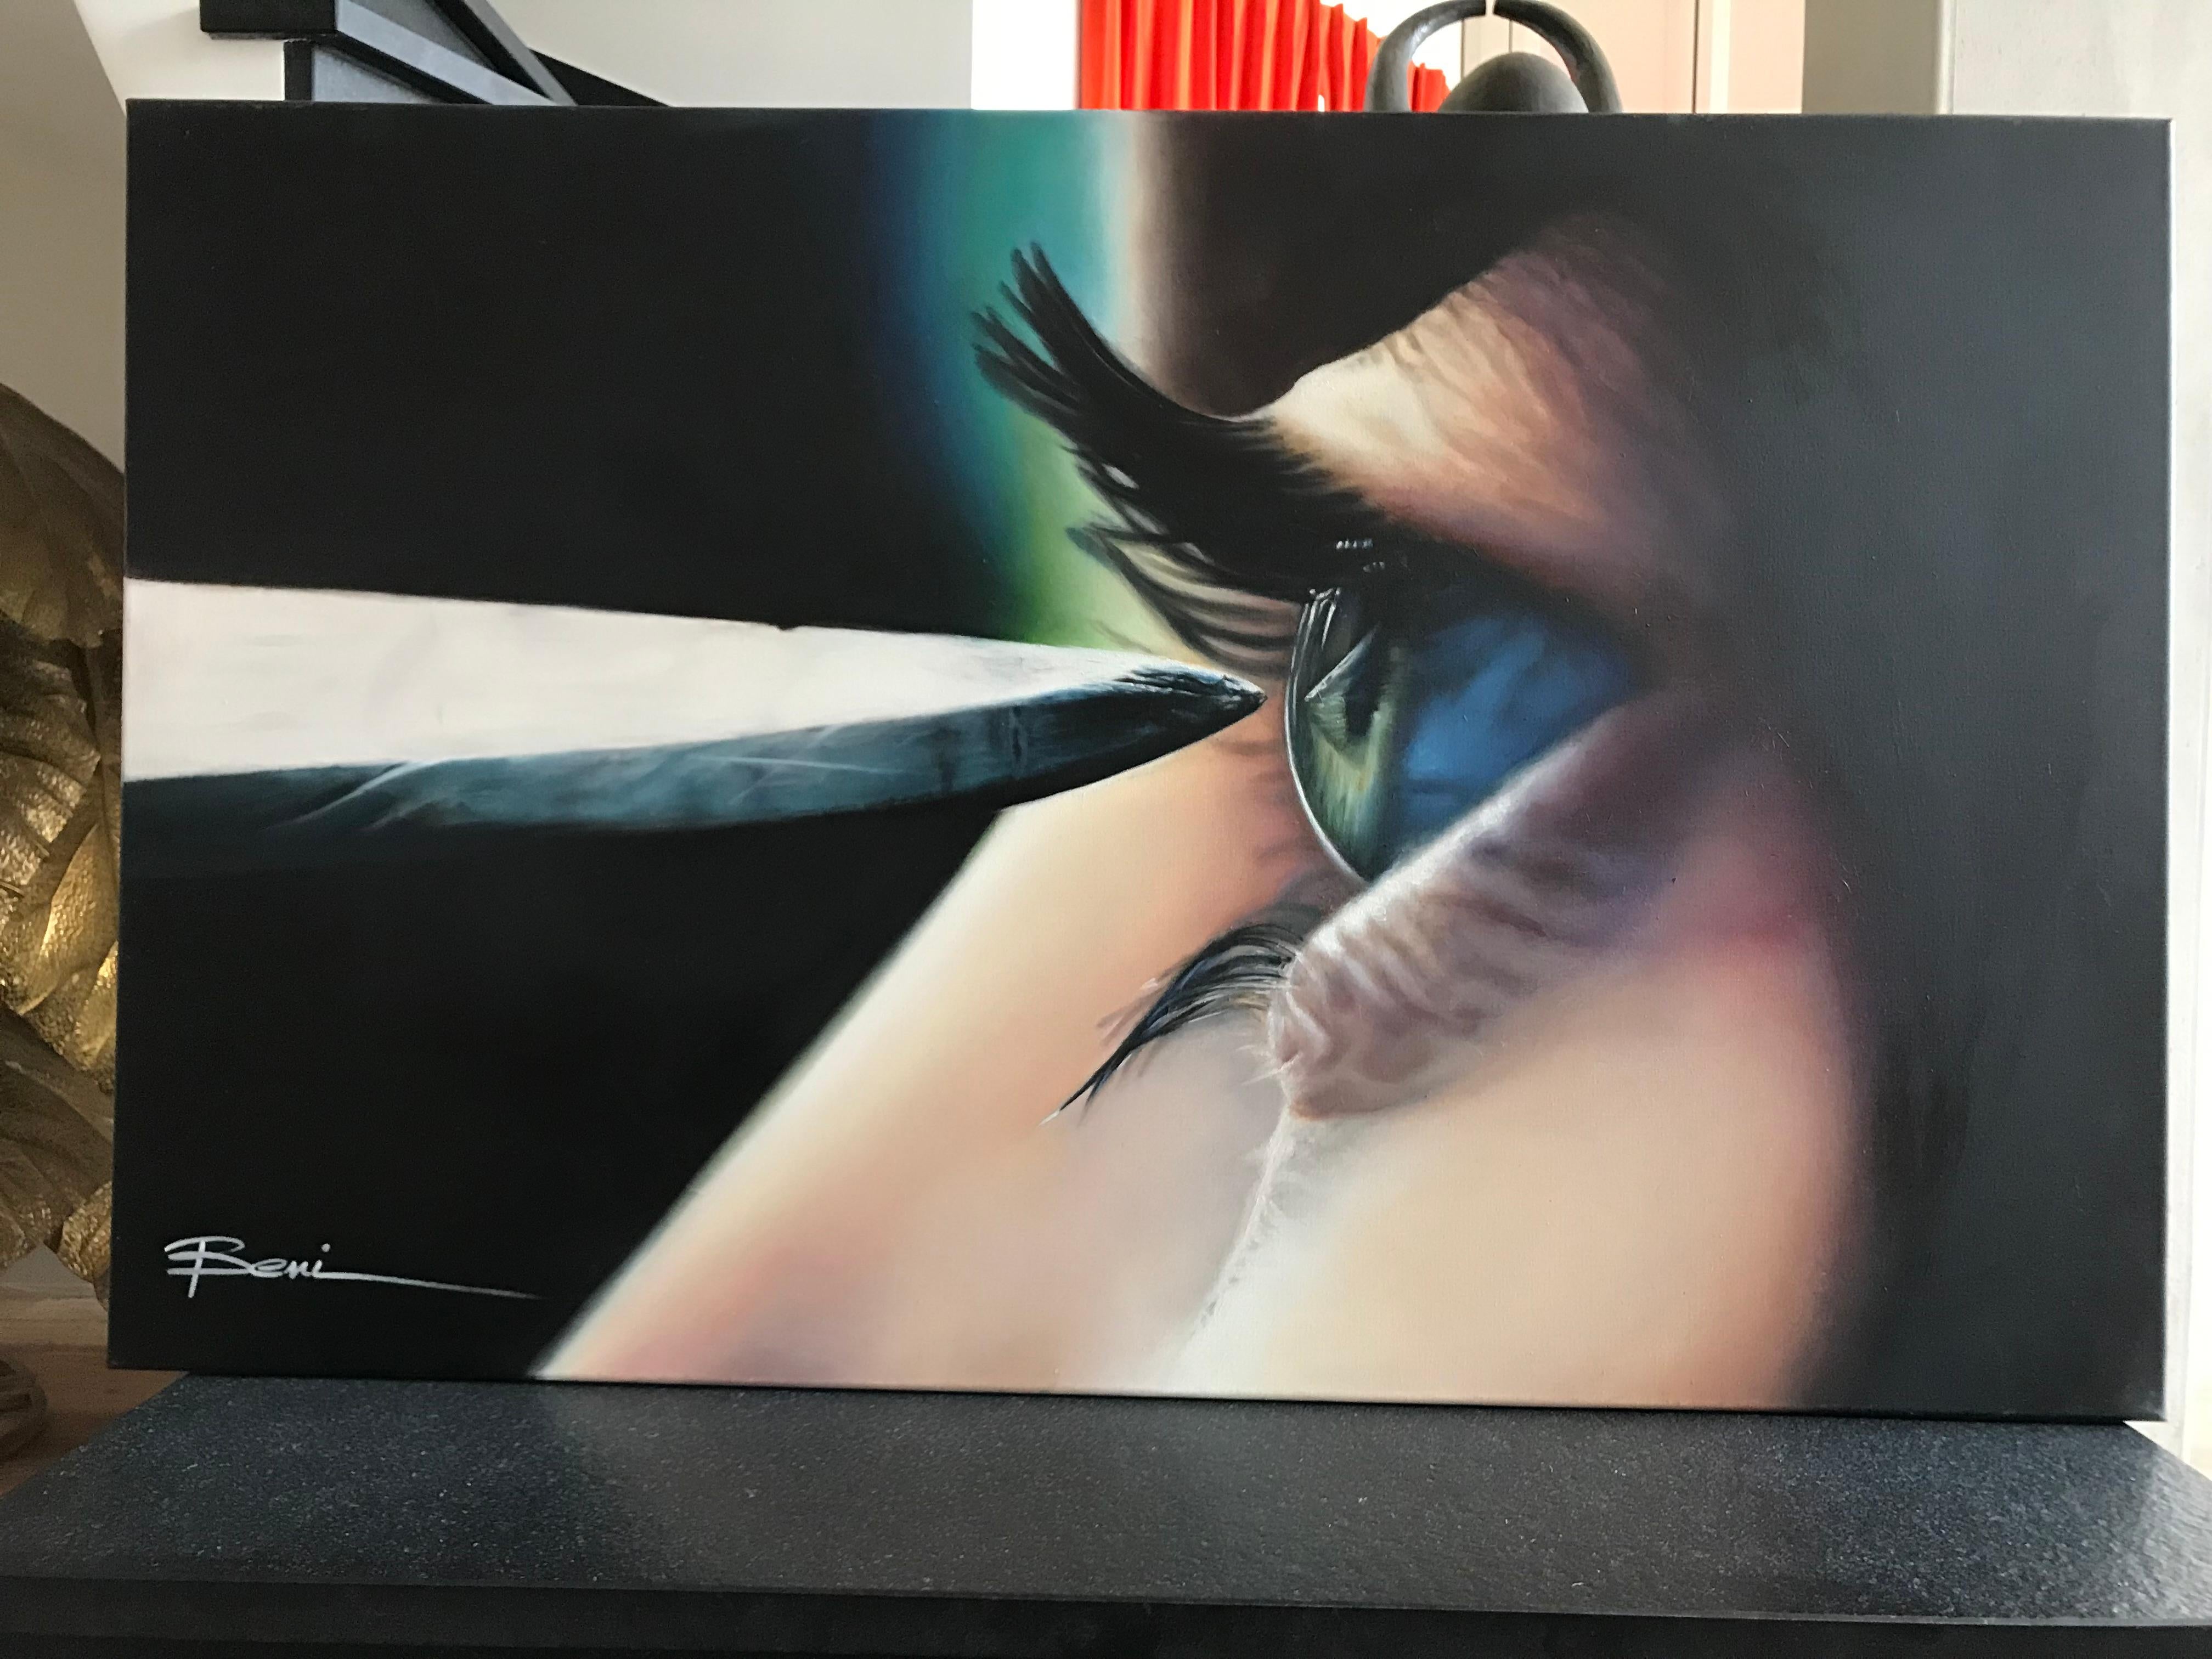 Blade to the eye - Painting by Unknown